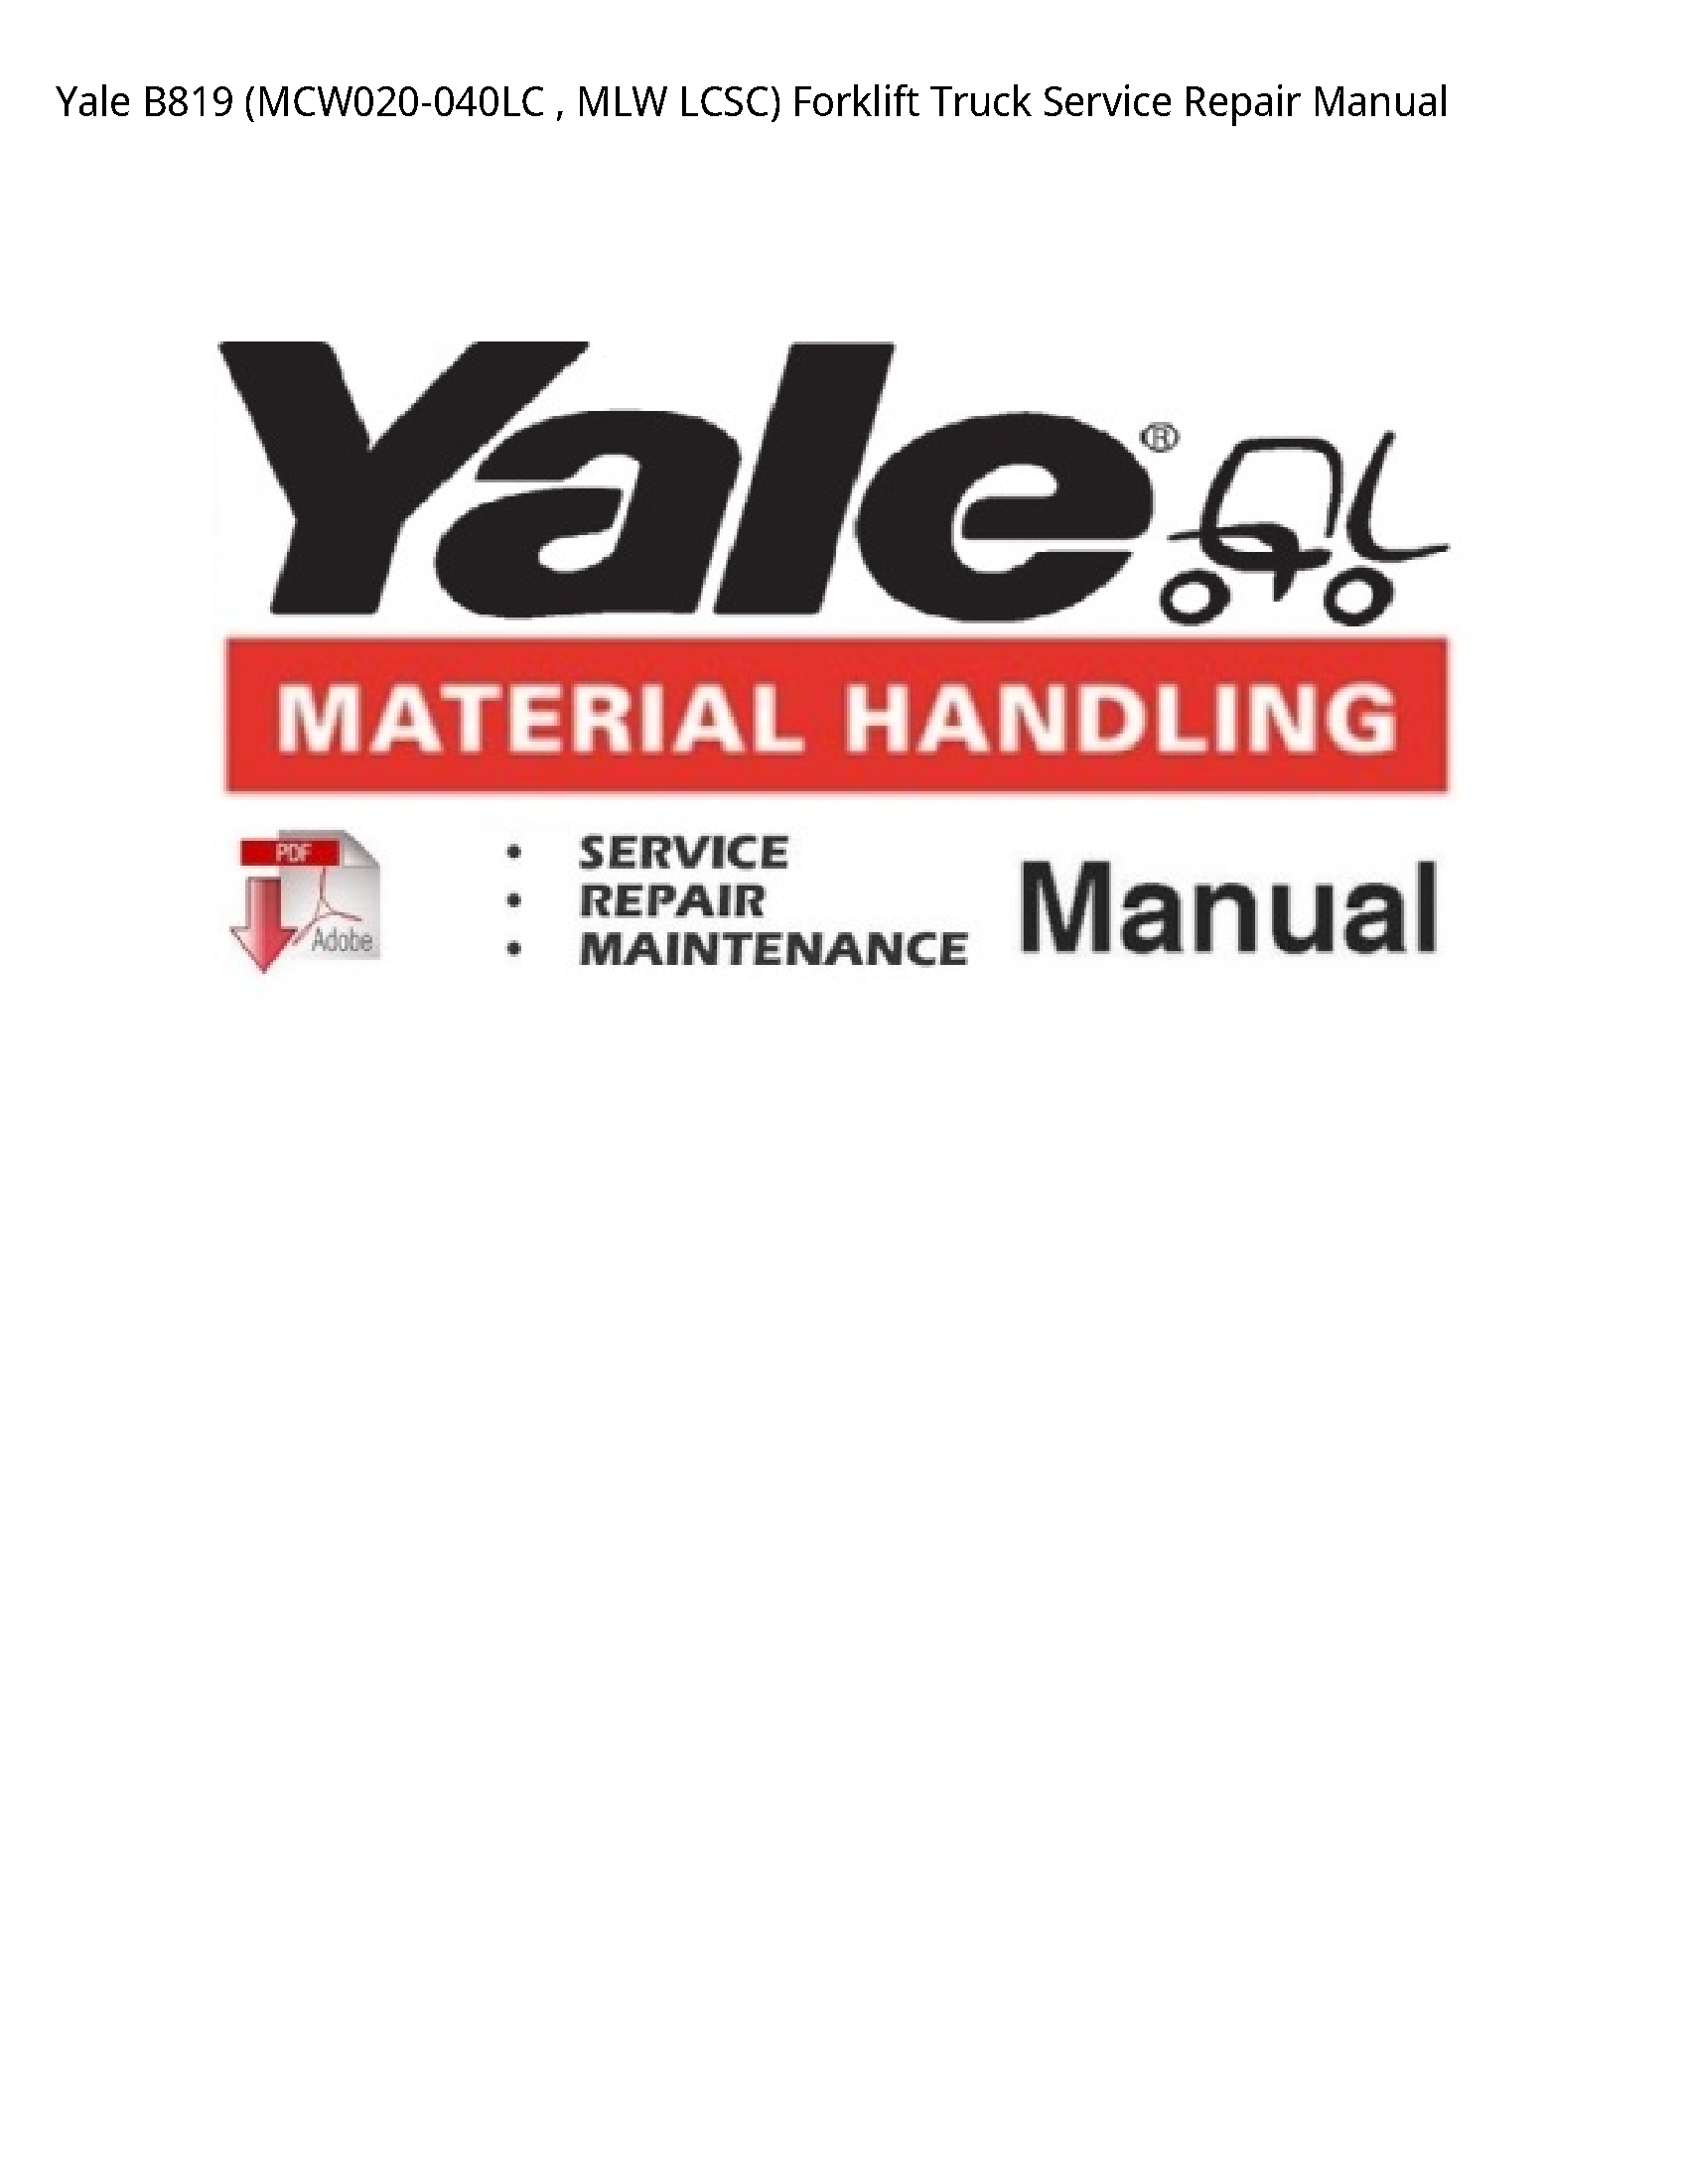 Yale B819 MLW LCSC) Forklift Truck manual